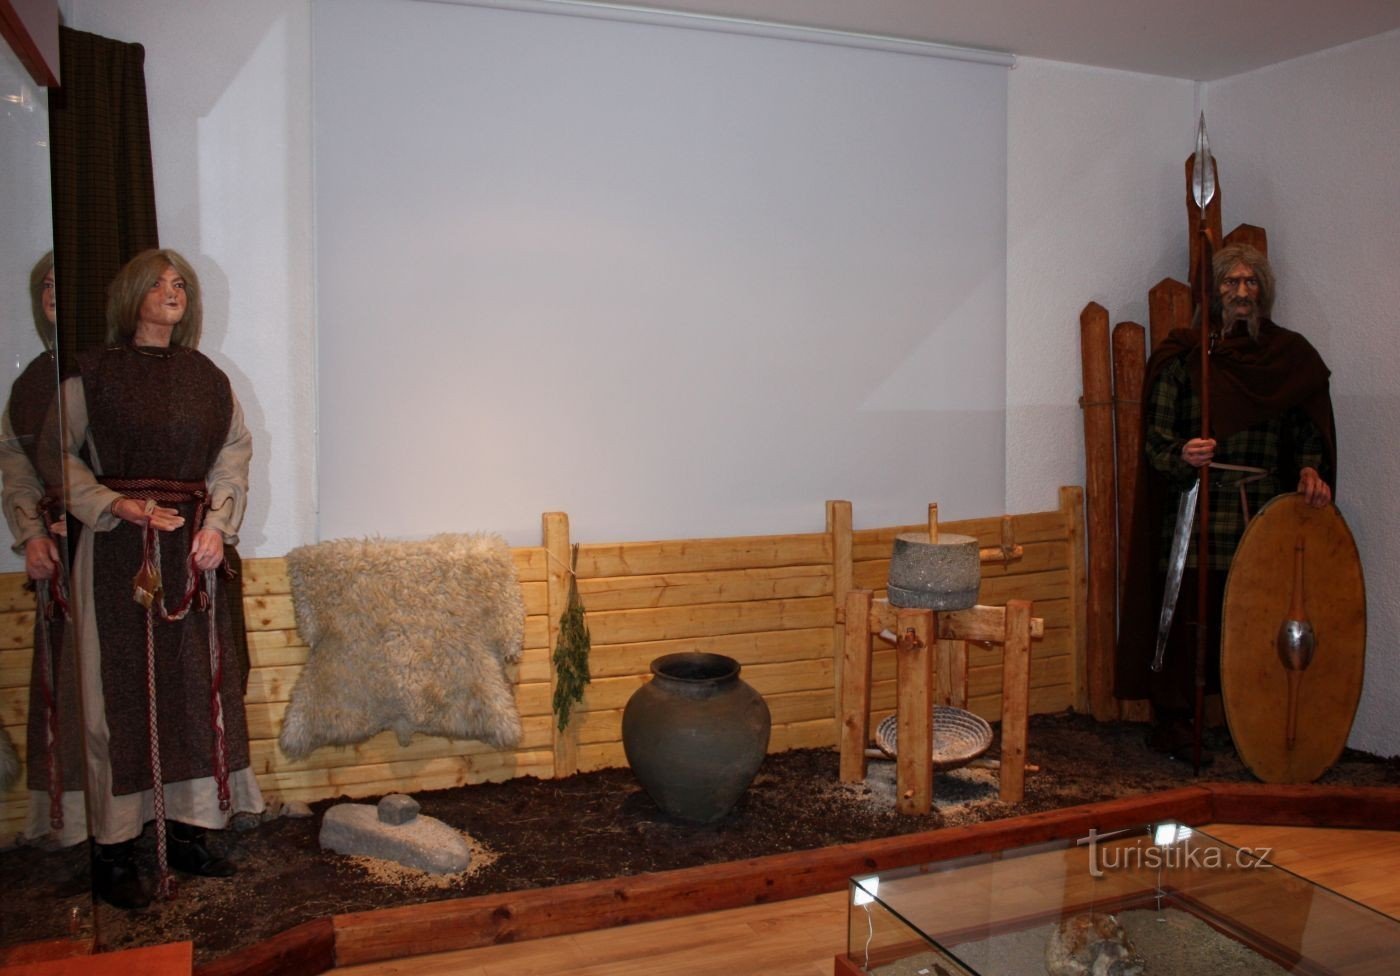 Museum of Celts in Dobšice - the world of men and the world of women